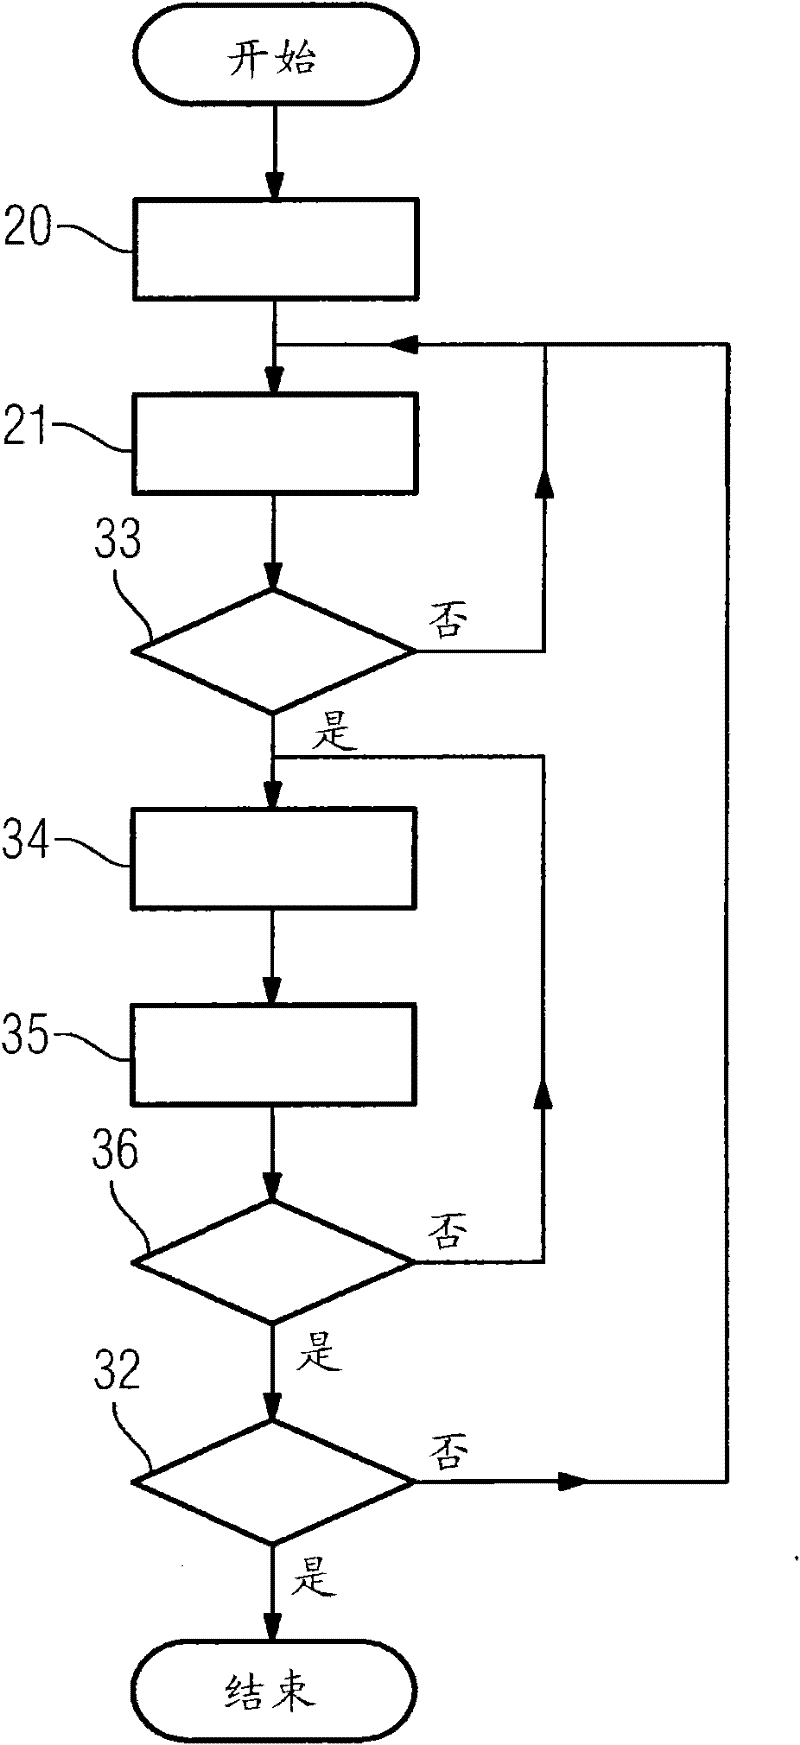 Method for controlling and/or regulating slipping motion of roller relative to strip, controller and/or regulator, machine-readable program code, storage medium and industrial plant